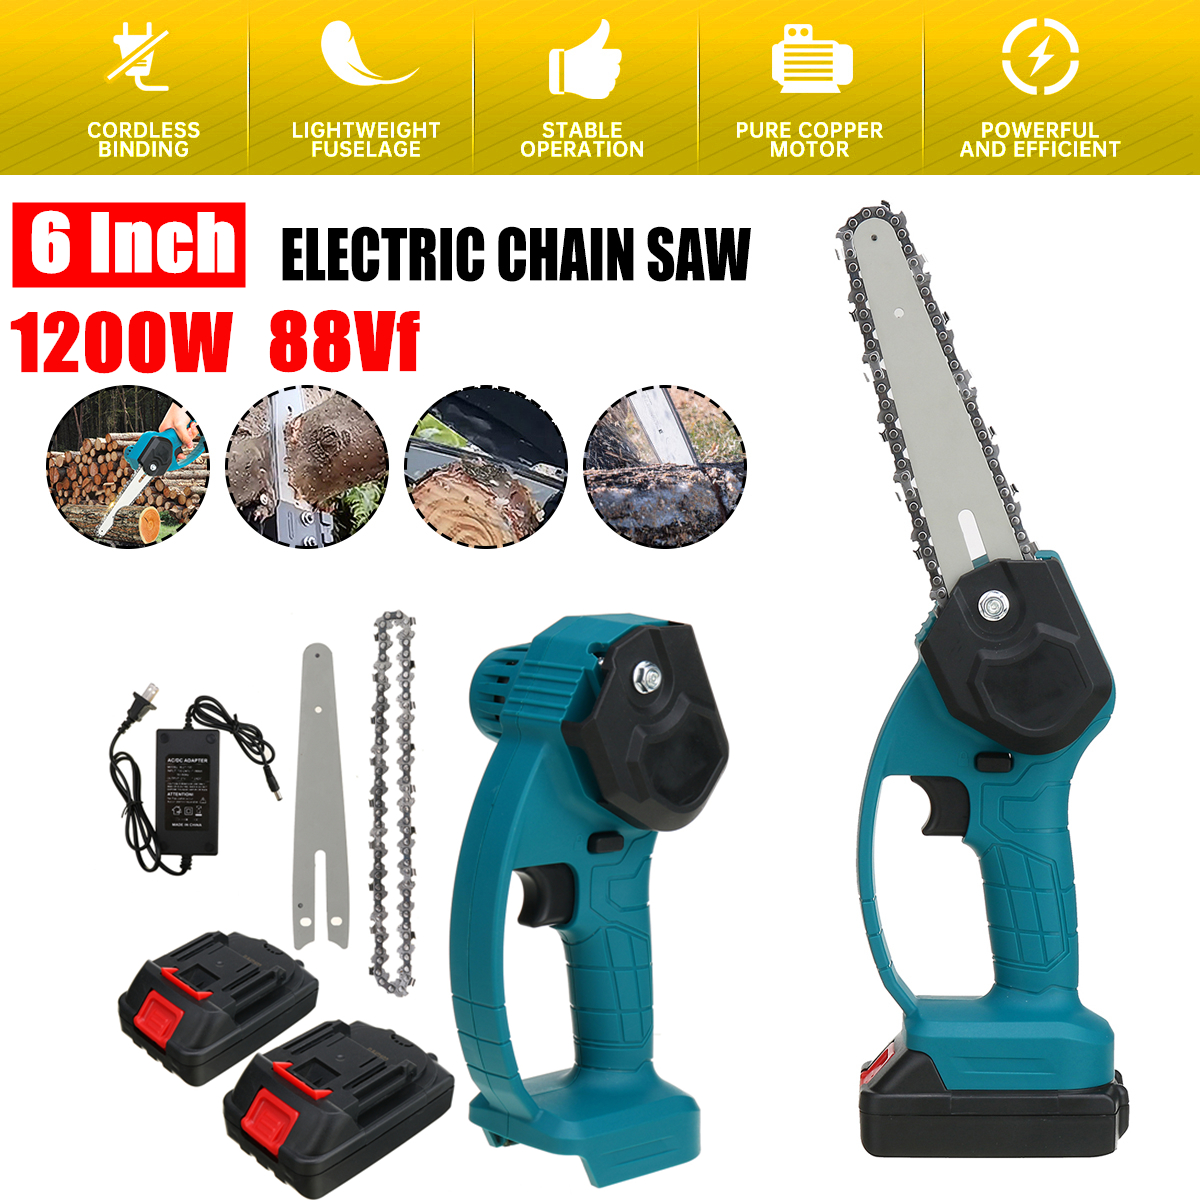 6inch-600W-Electric-Chain-Saw-Rechargeable-Stepless-Speed-Saws-Wood-Cutter-Woodworking-Tool-W-2pcs-B-1827208-1